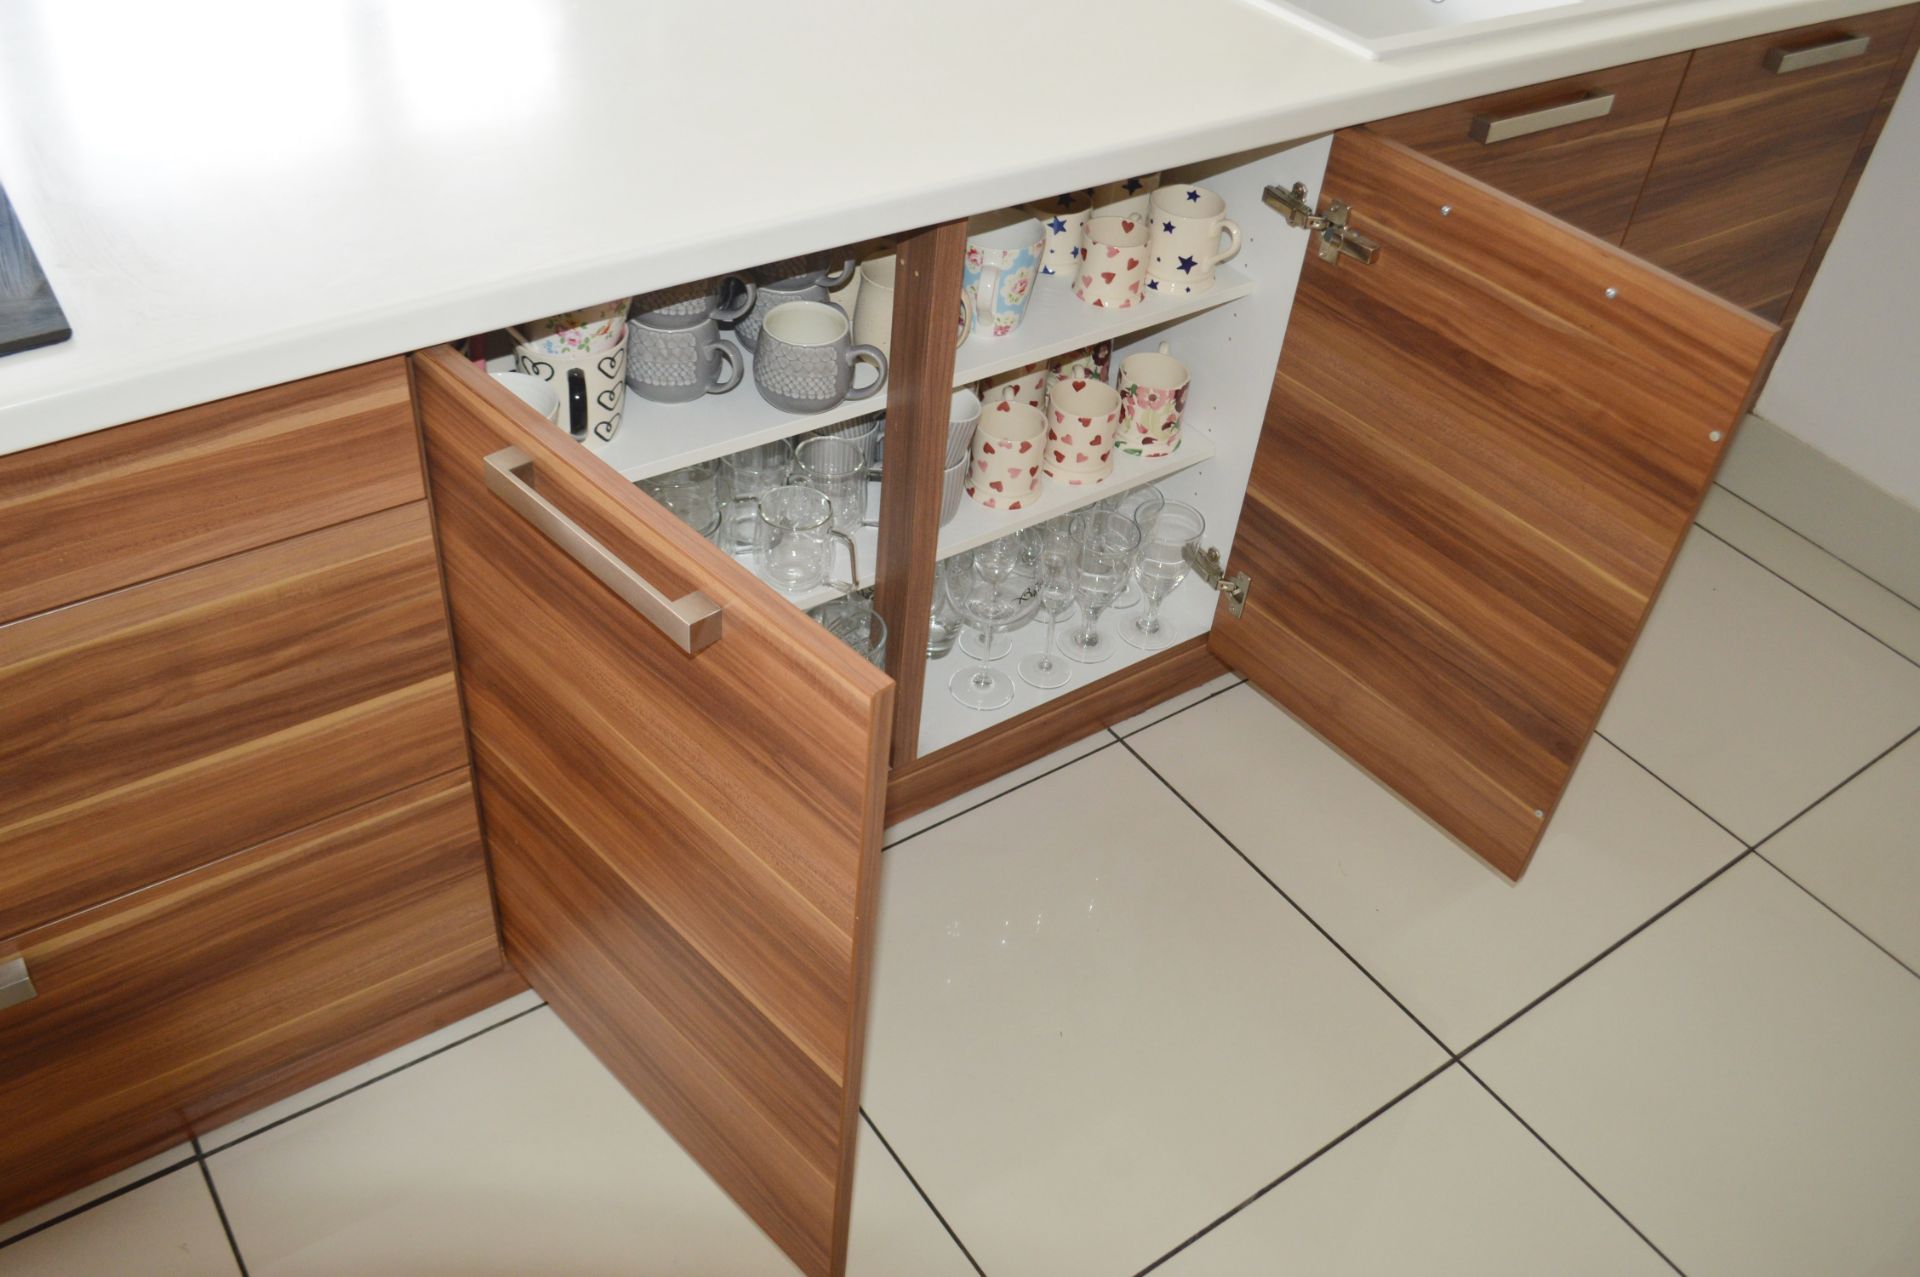 1 x Contemporary Bespoke Fitted Kitchen With Neff Branded Appliances - Collection Date: 1st November - Image 2 of 52